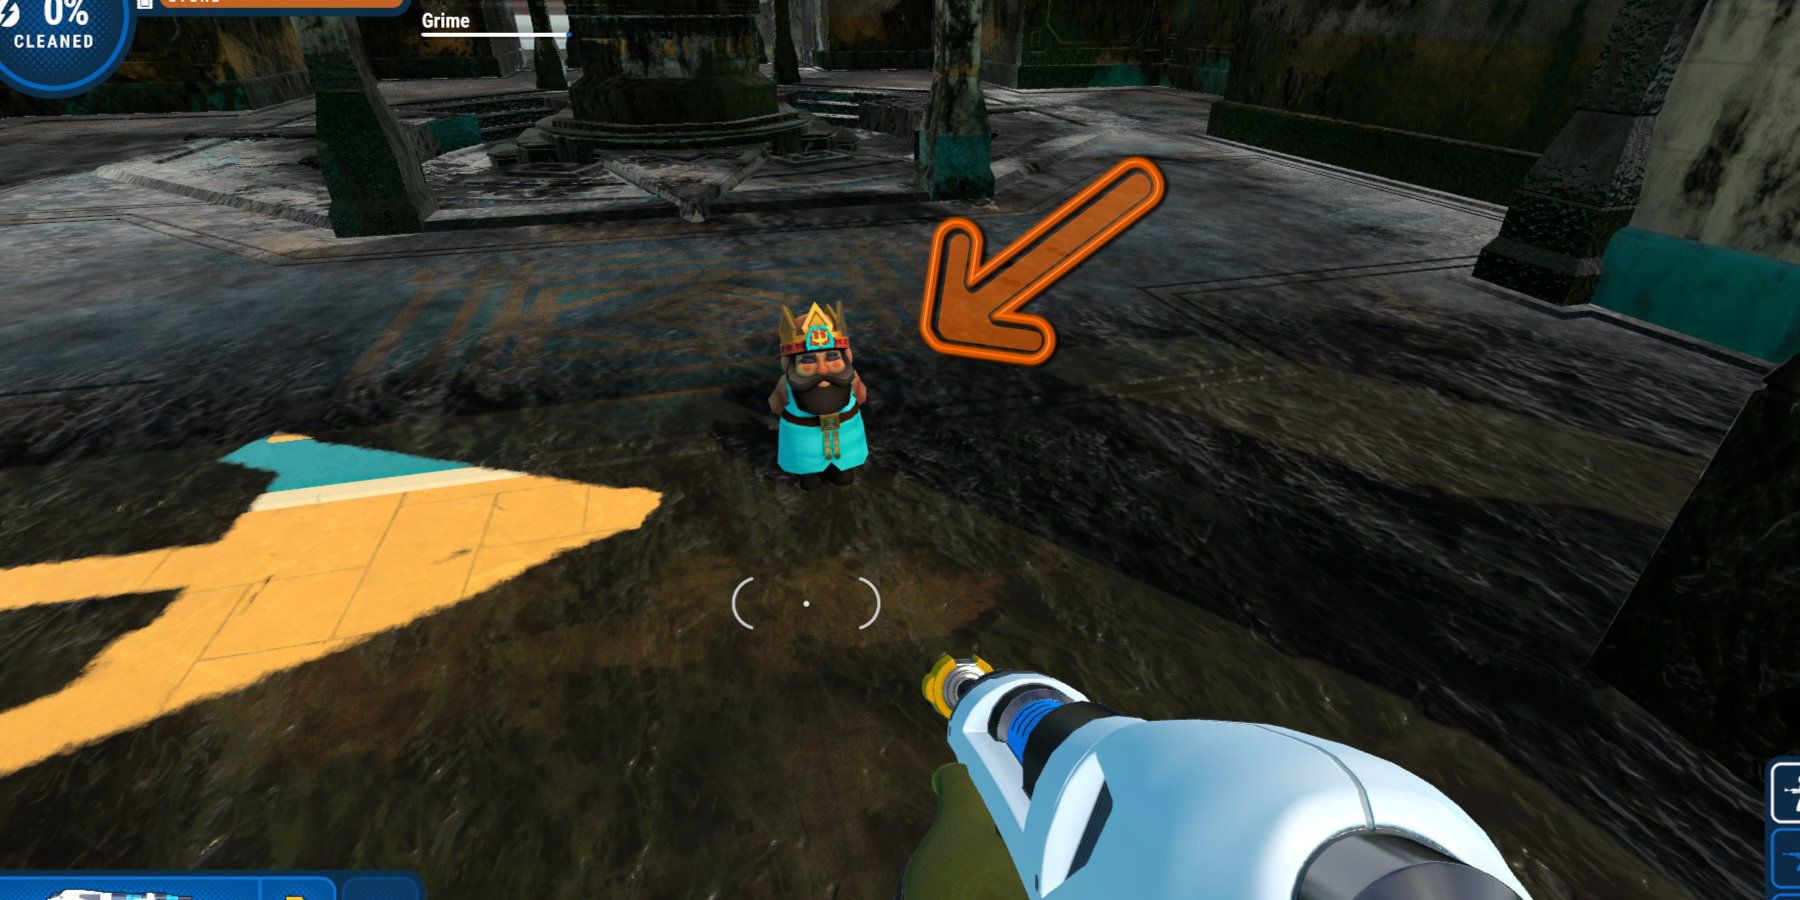 A garden gnome with a crown standing in a dirty palace, highlighted by an arrow.